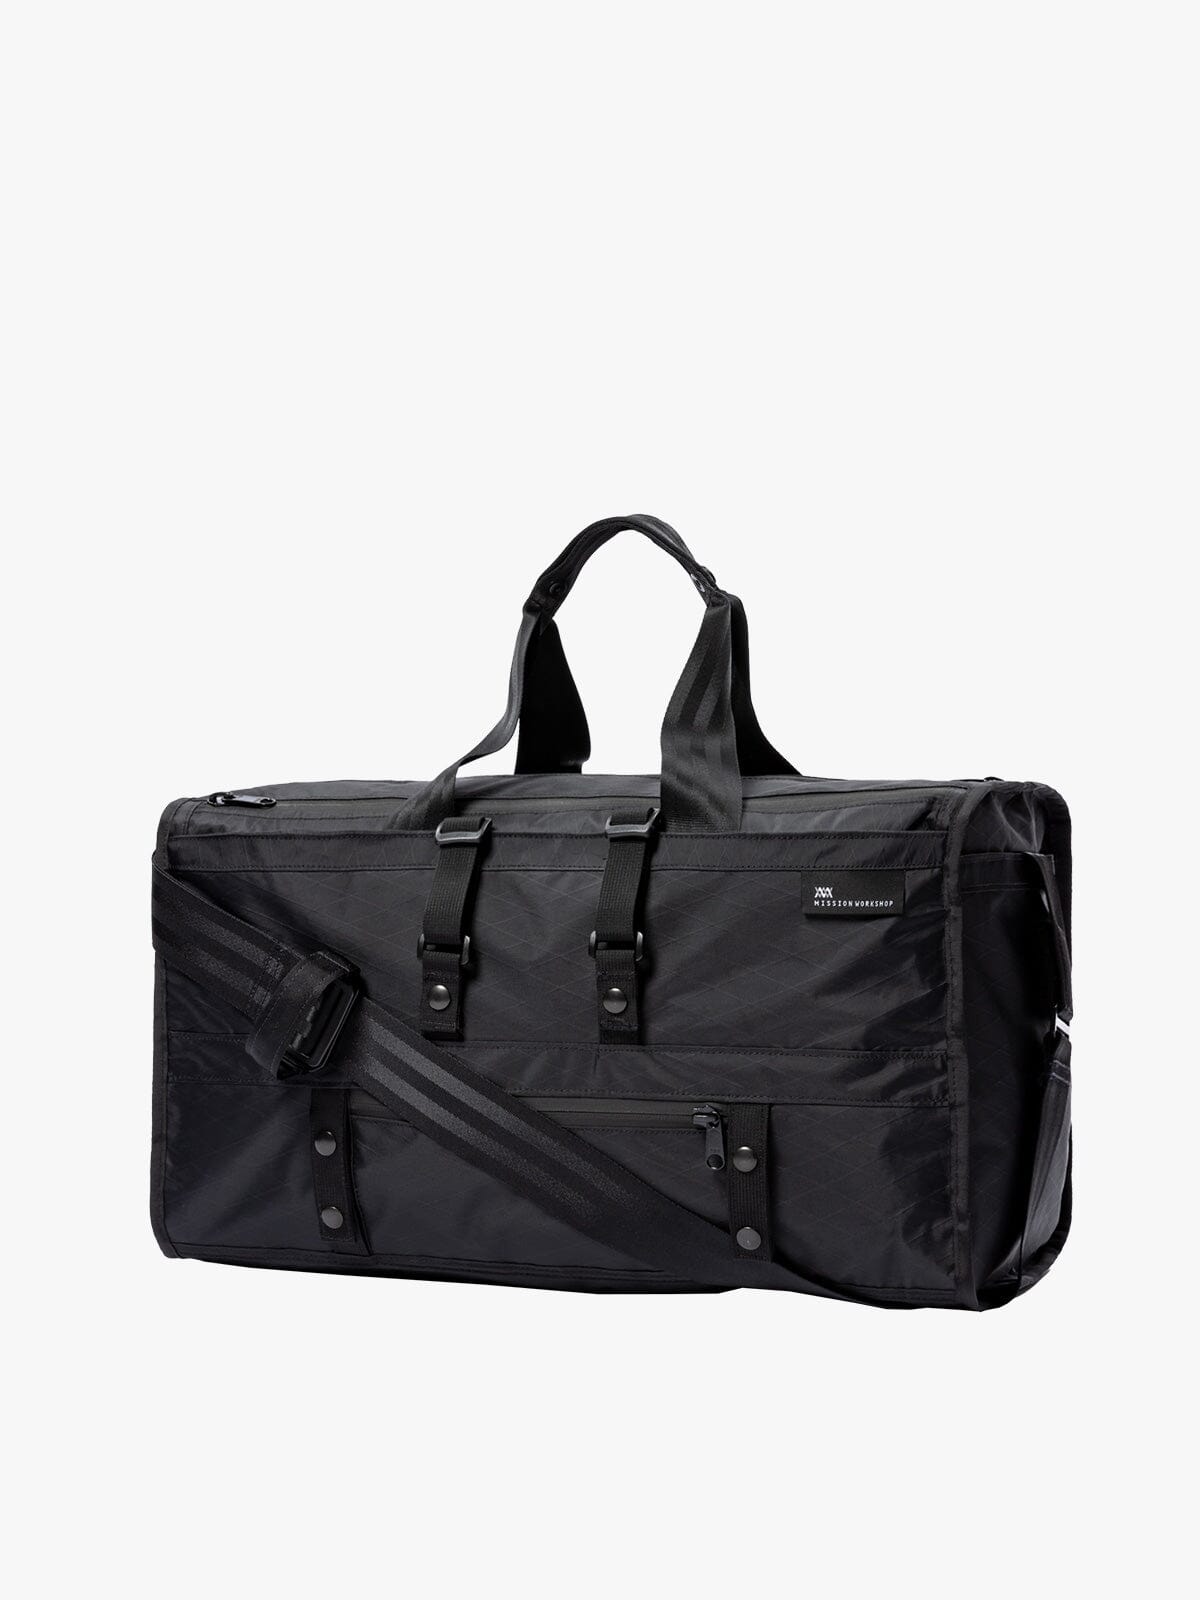 Mass Transit : Duffle by Mission Workshop - Weatherproof Bags & Technical Apparel - San Francisco & Los Angeles - Built to endure - Guaranteed forever